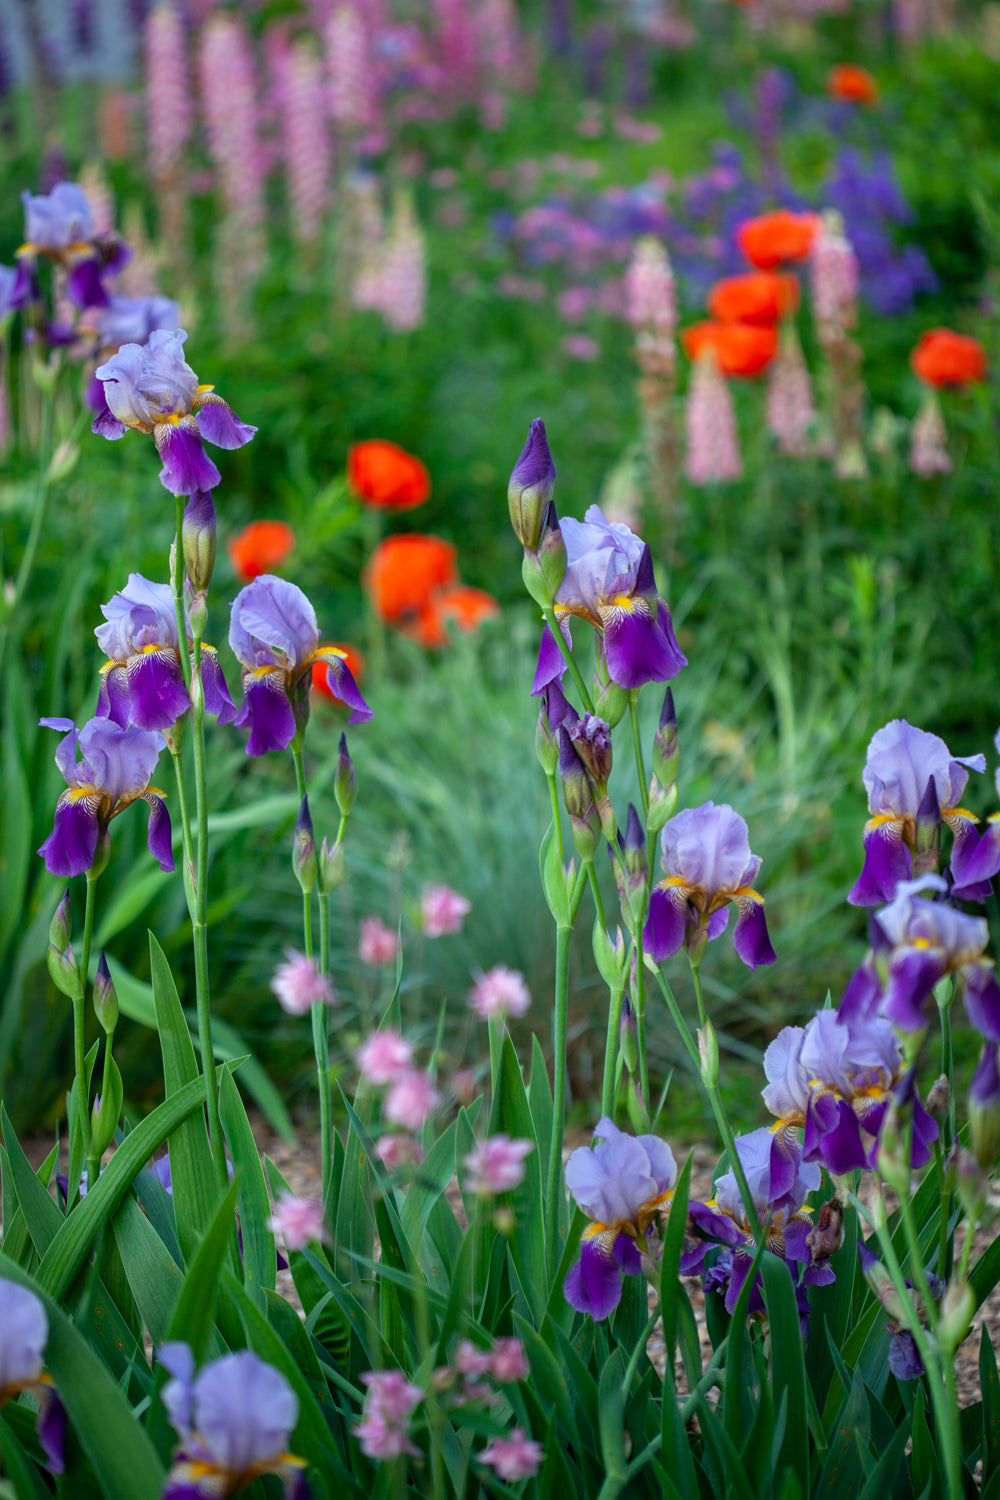 close up photograph of purple bearded irises in the foreground with blurred red poppies and pink lupines in the background. Photog created by Laura Cook 